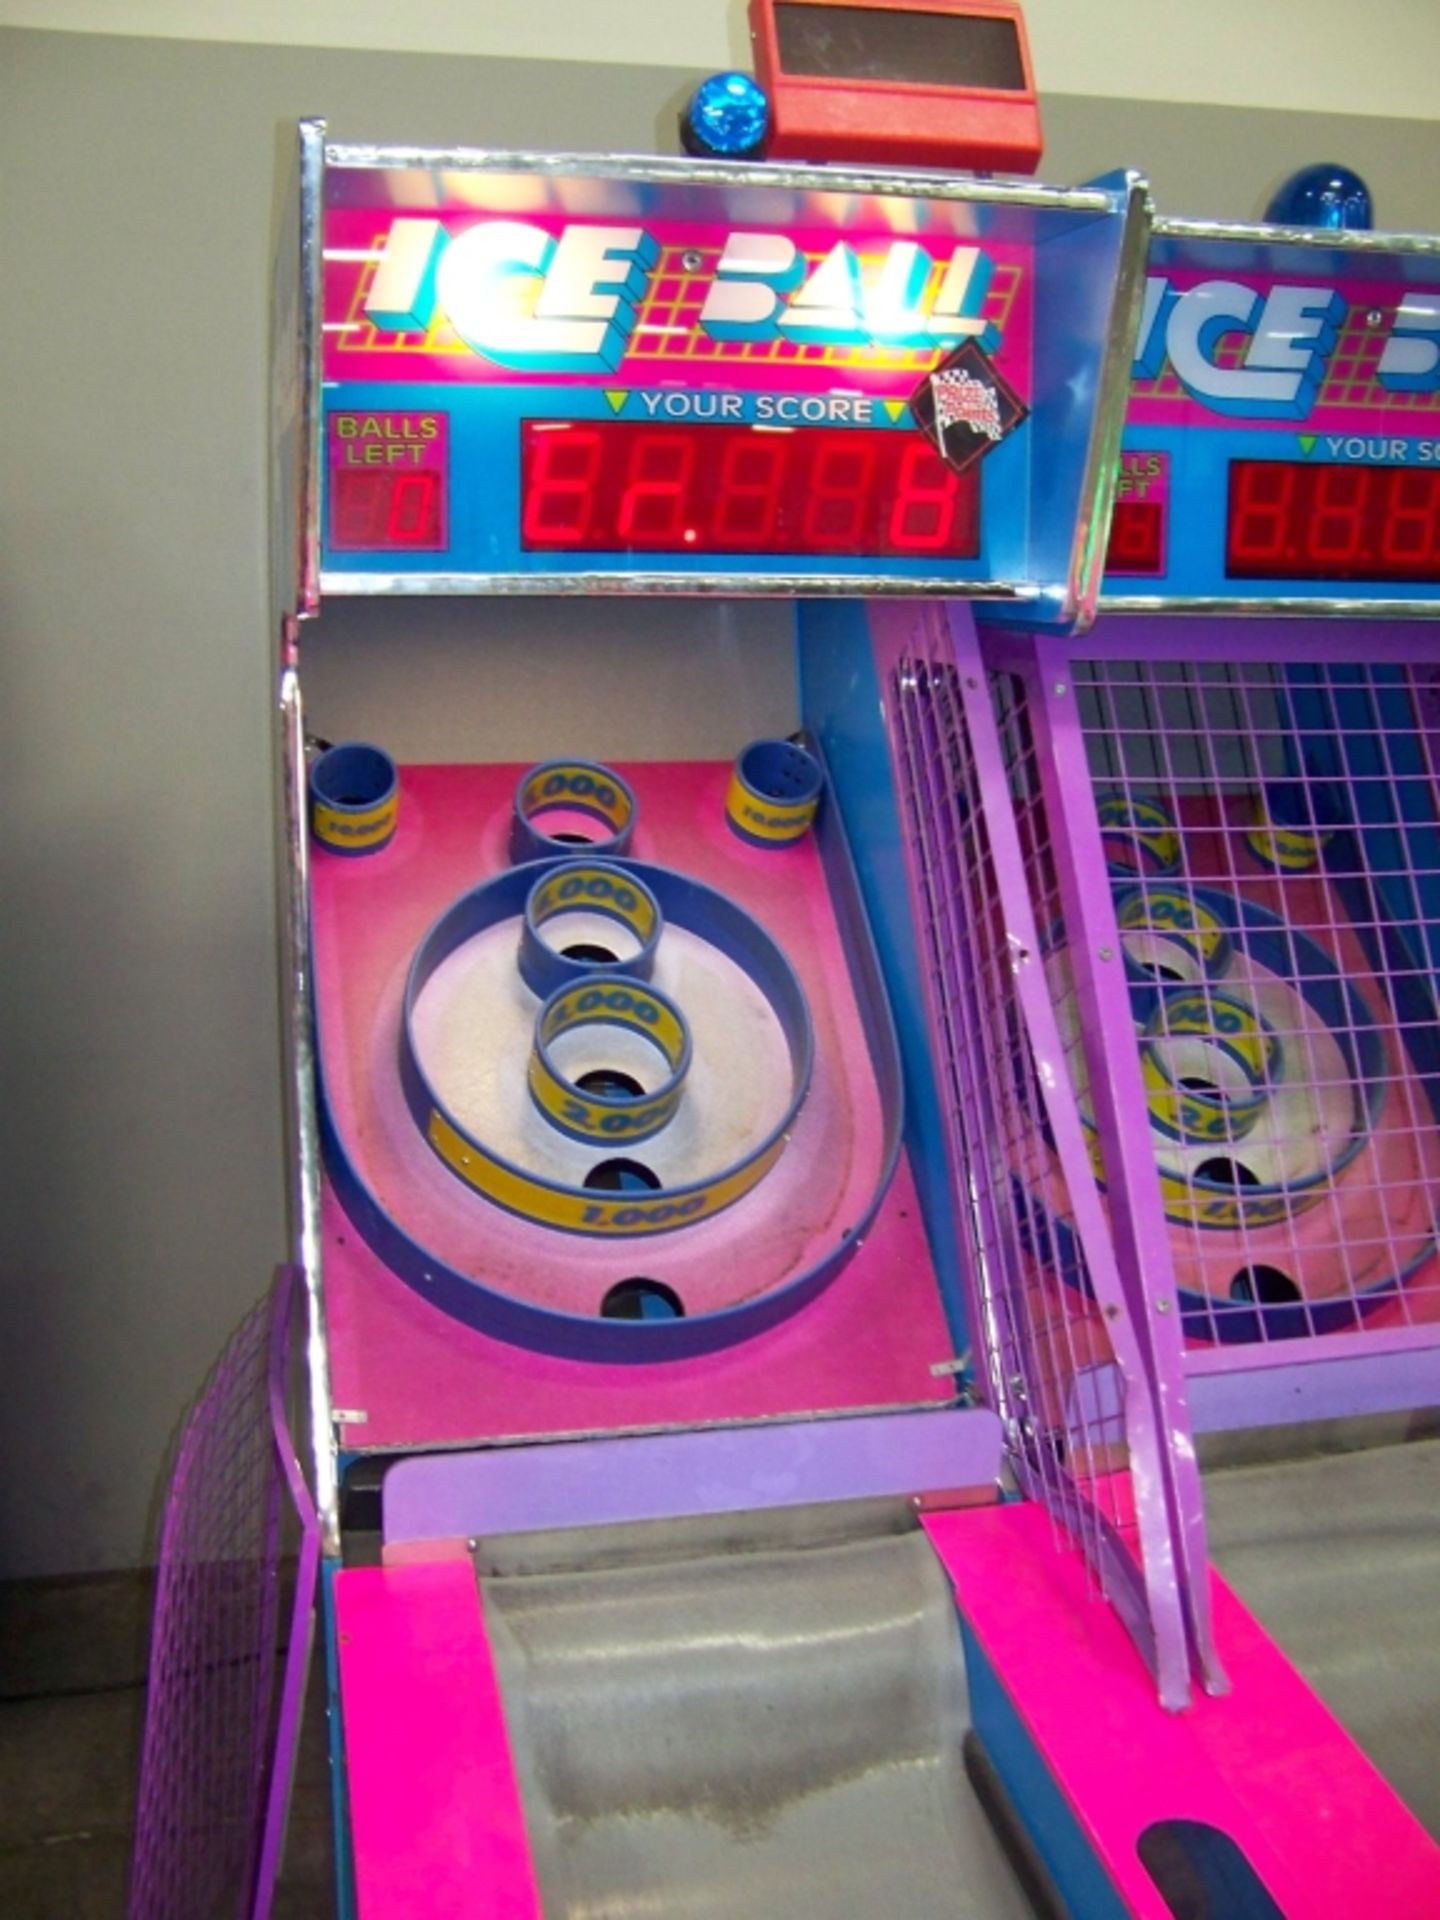 ICE BALL ALLEY ROLLER REDEMPTION GAME I.C.E. - Image 3 of 3